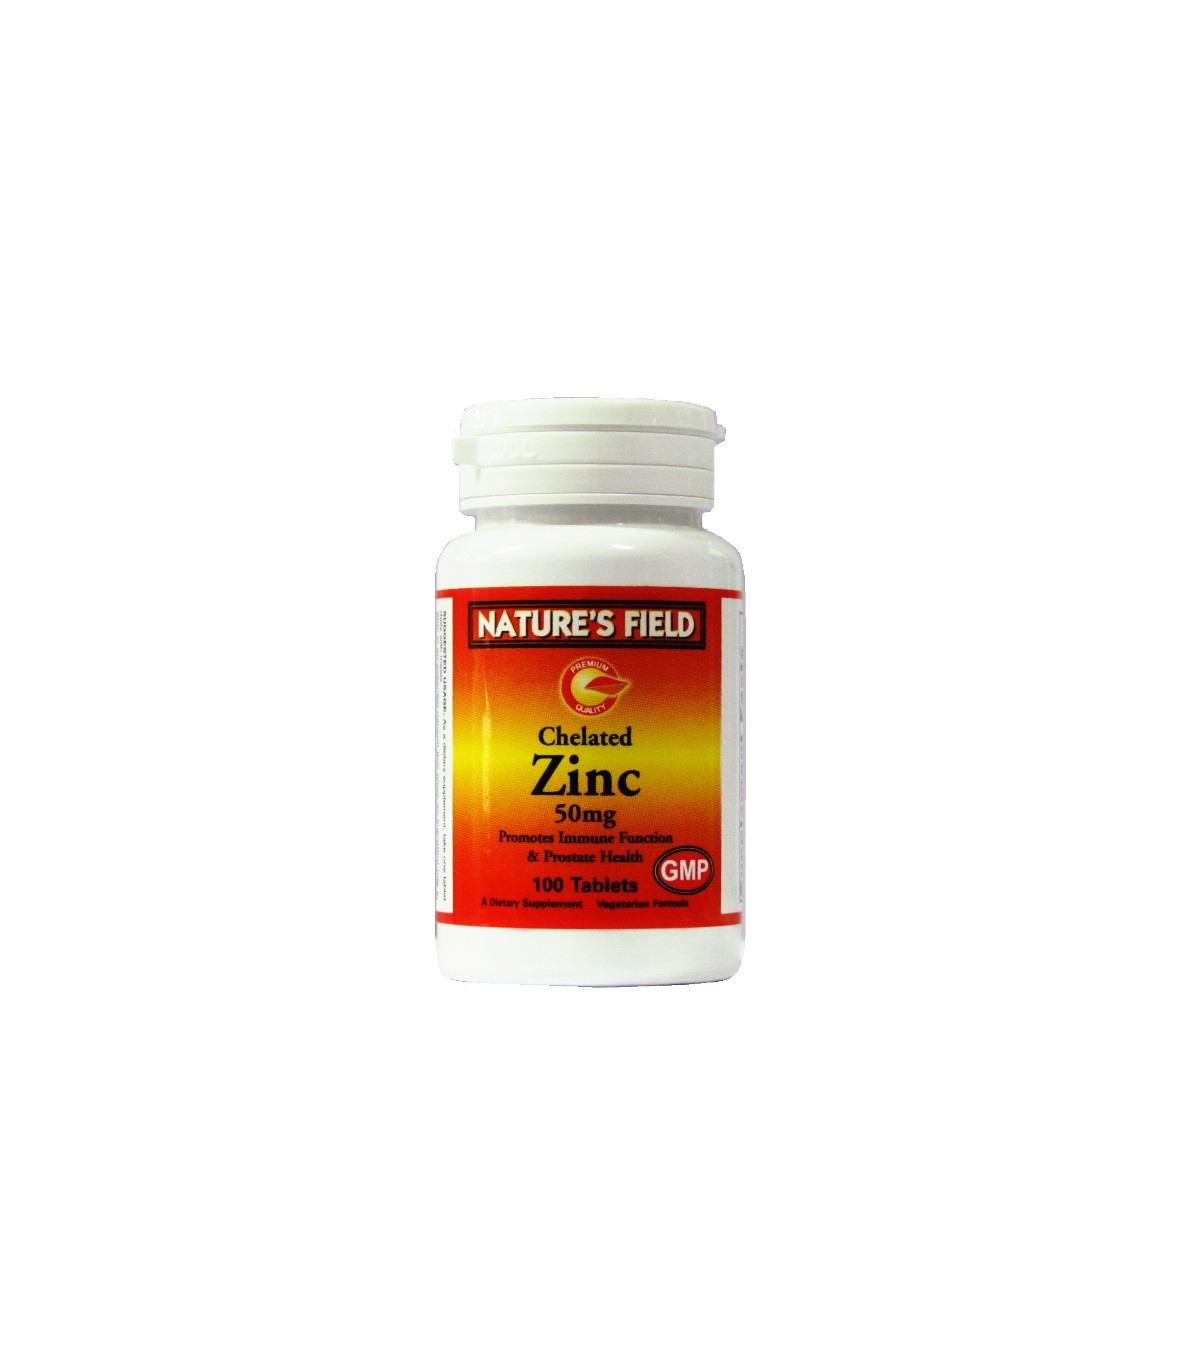 Nature's Field Chelated Zinc 50mg - 100 Tablets